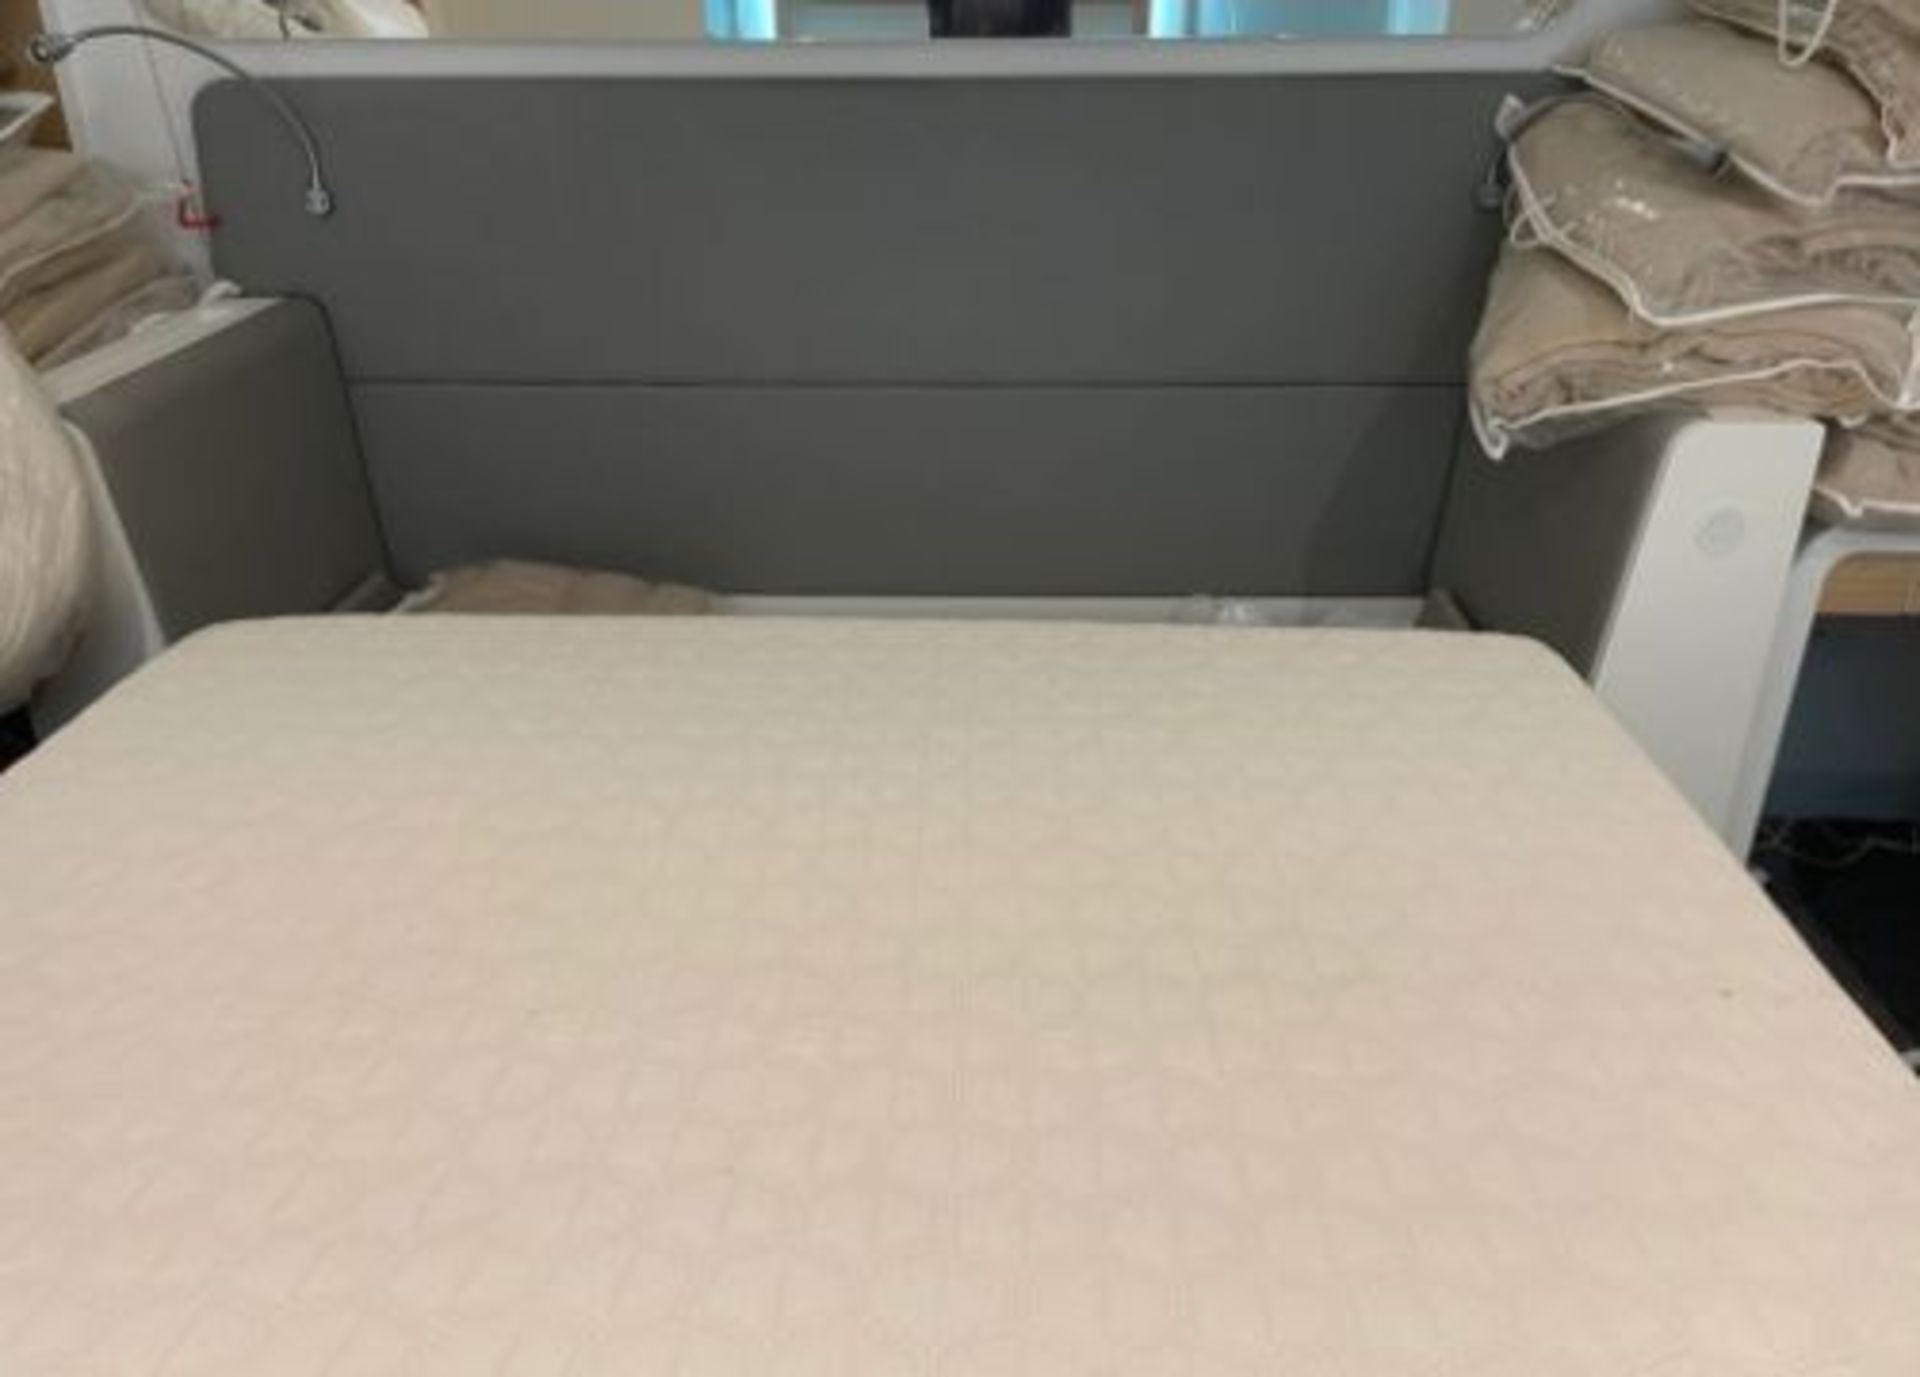 1 x Double Adjustable Space Saving Smart Bed With Serta Motion Memory Foam Mattress - Signature - Image 9 of 12